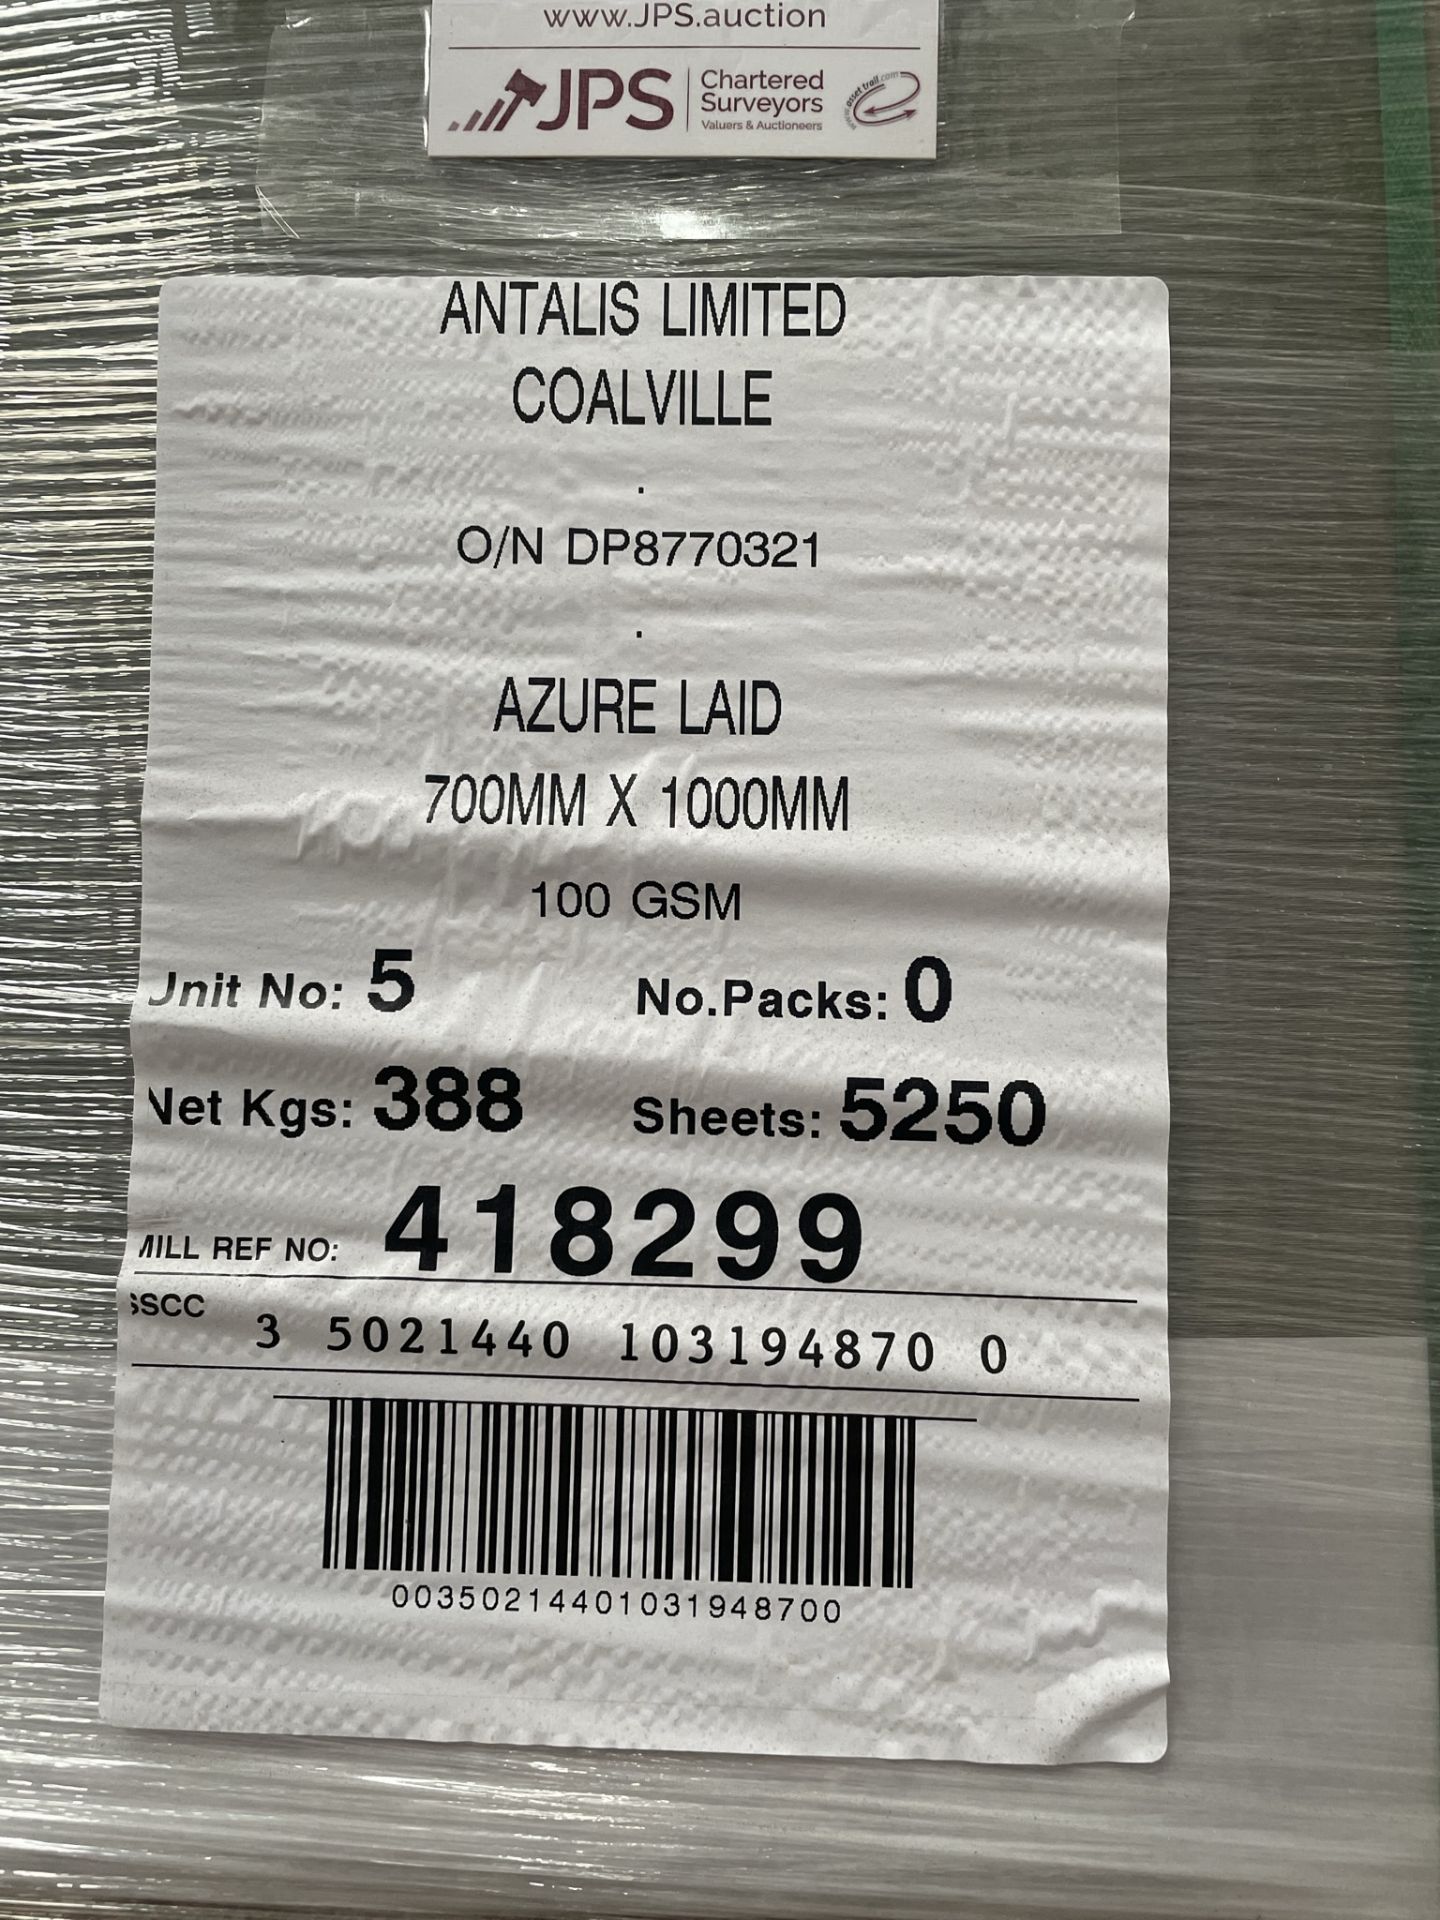 3 x Pallets of Azure Laid 100GSM Paper | 70 x 100cm | Approx 14,500 in Total - Image 2 of 2